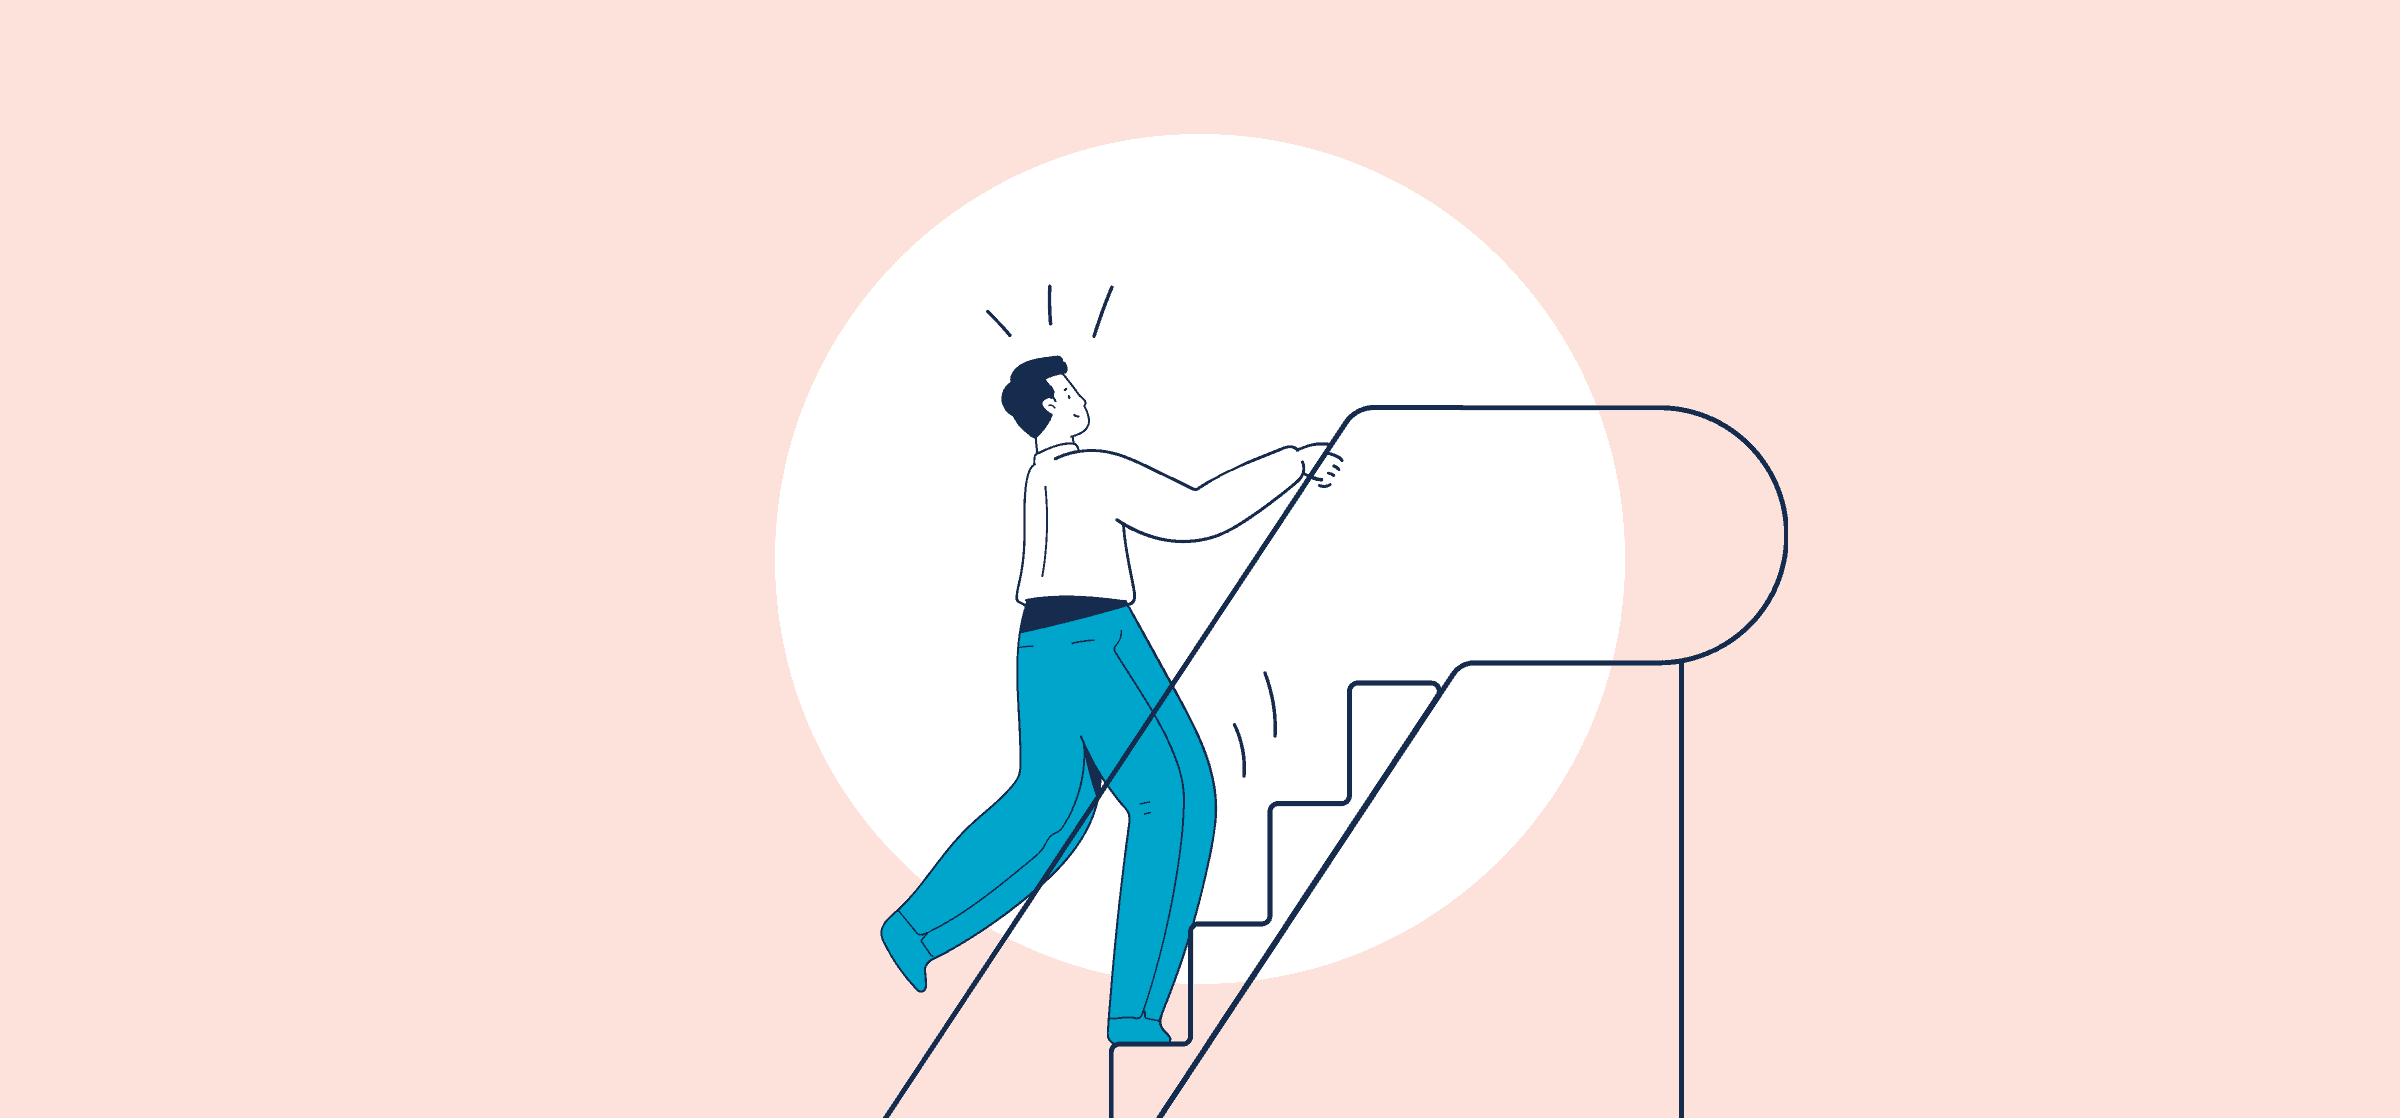 A person going up an escalator, representing a scalable business.